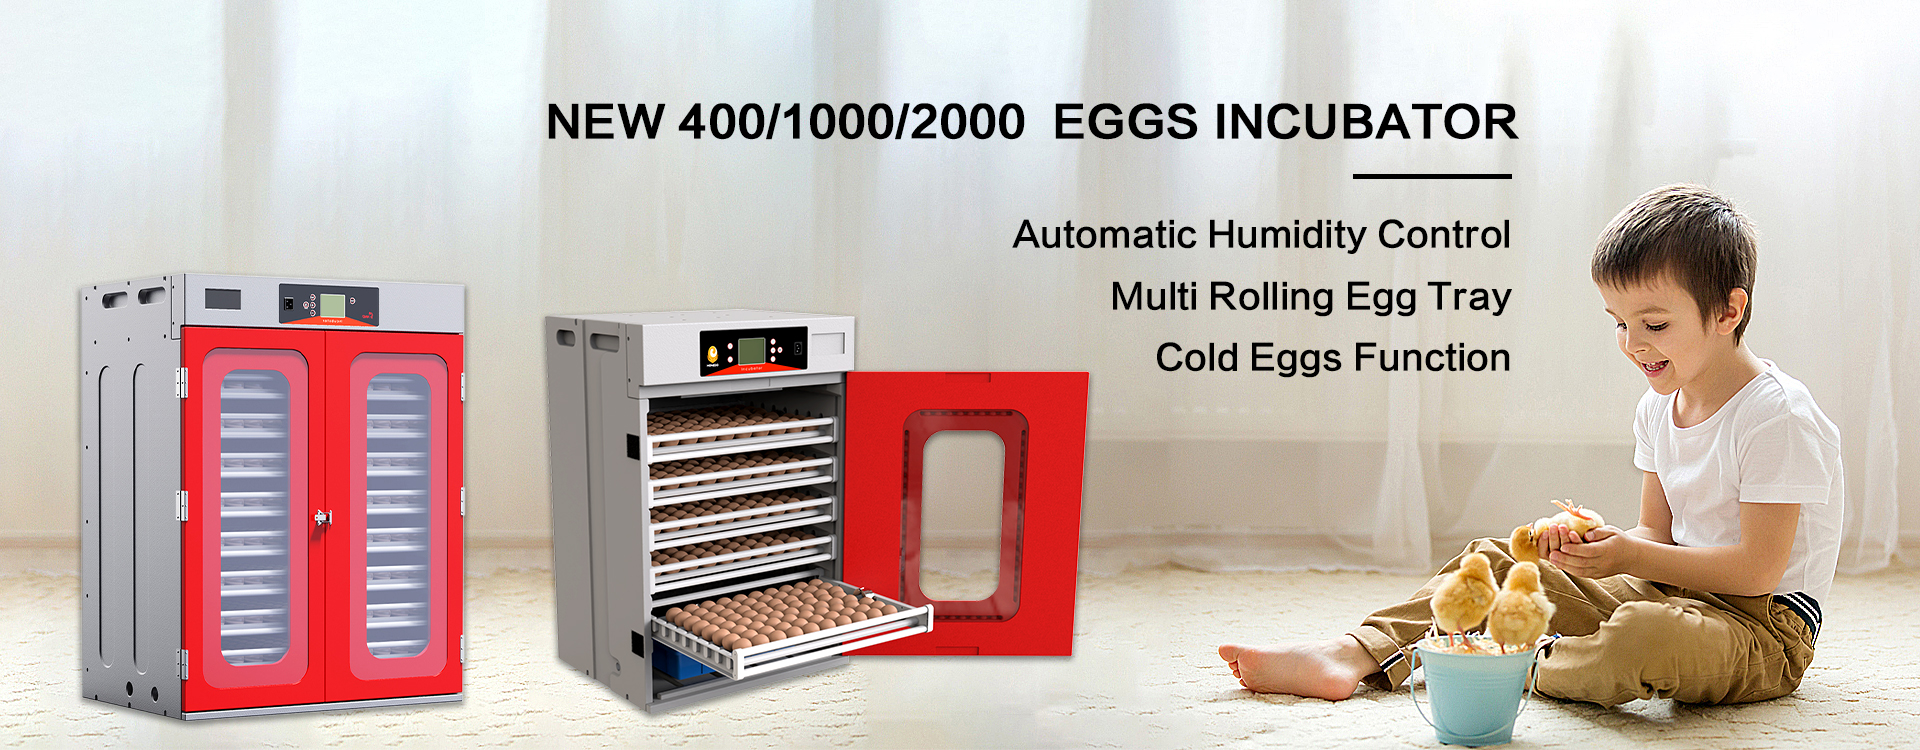 What is the purpose of an egg incubator?